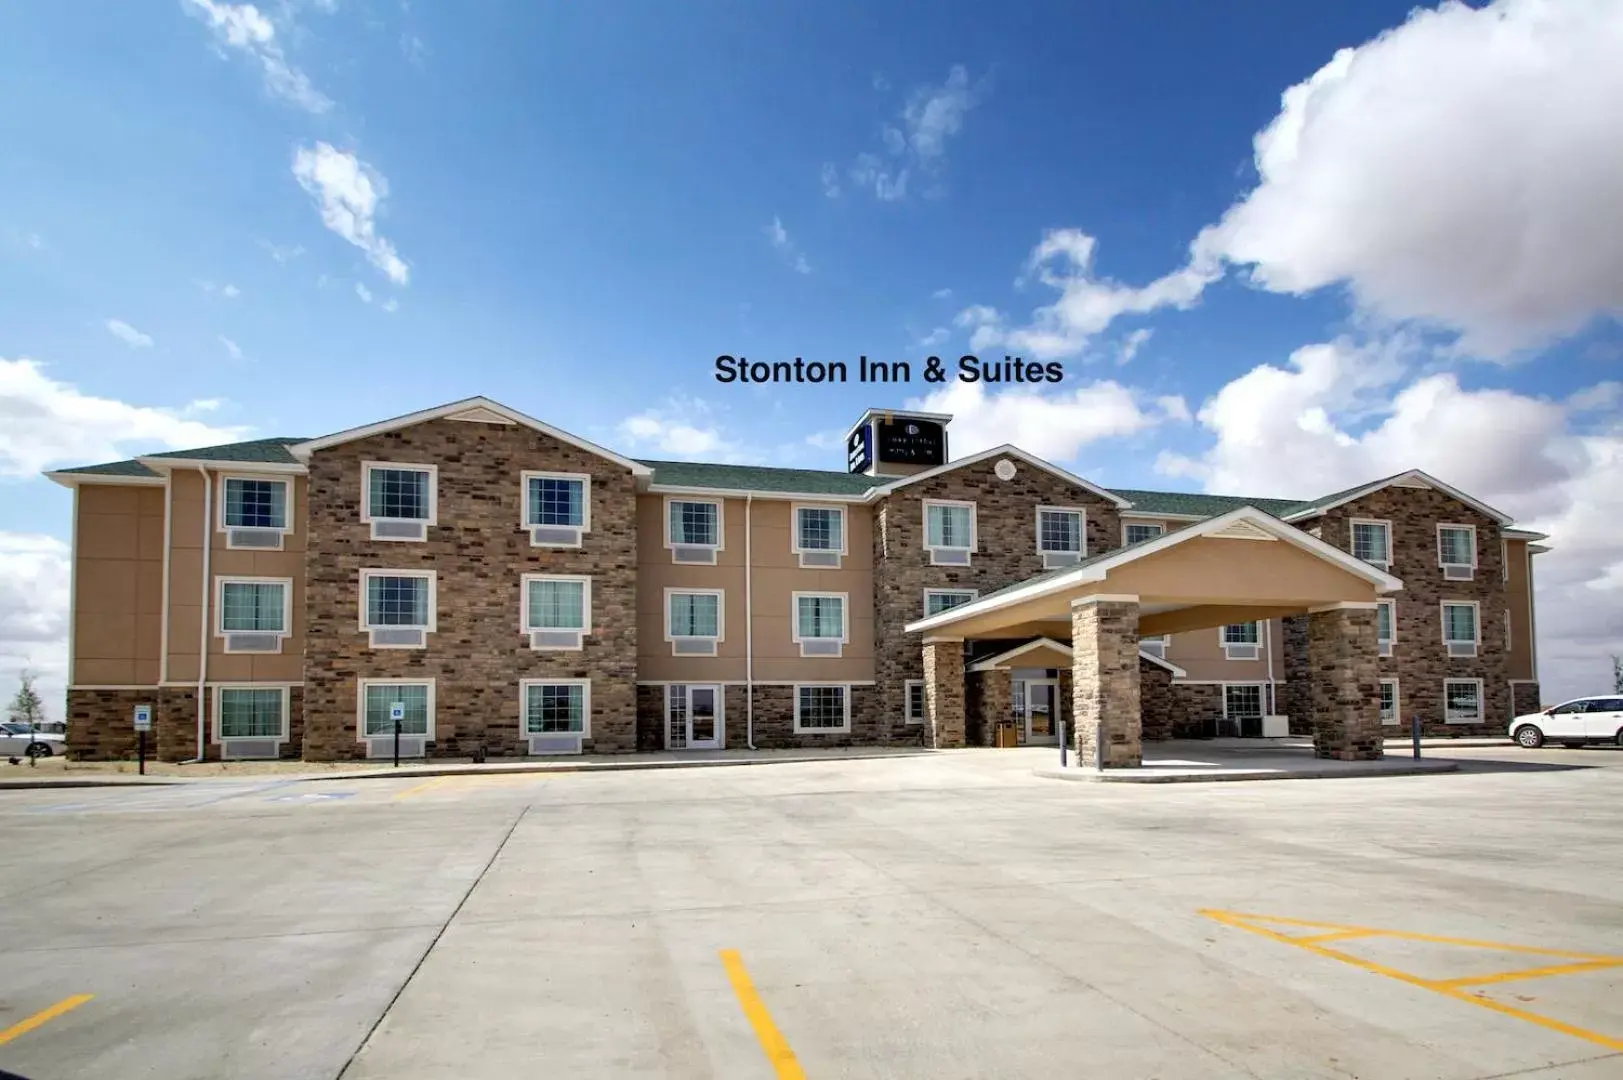 Property building in Stanton Inn and Suites